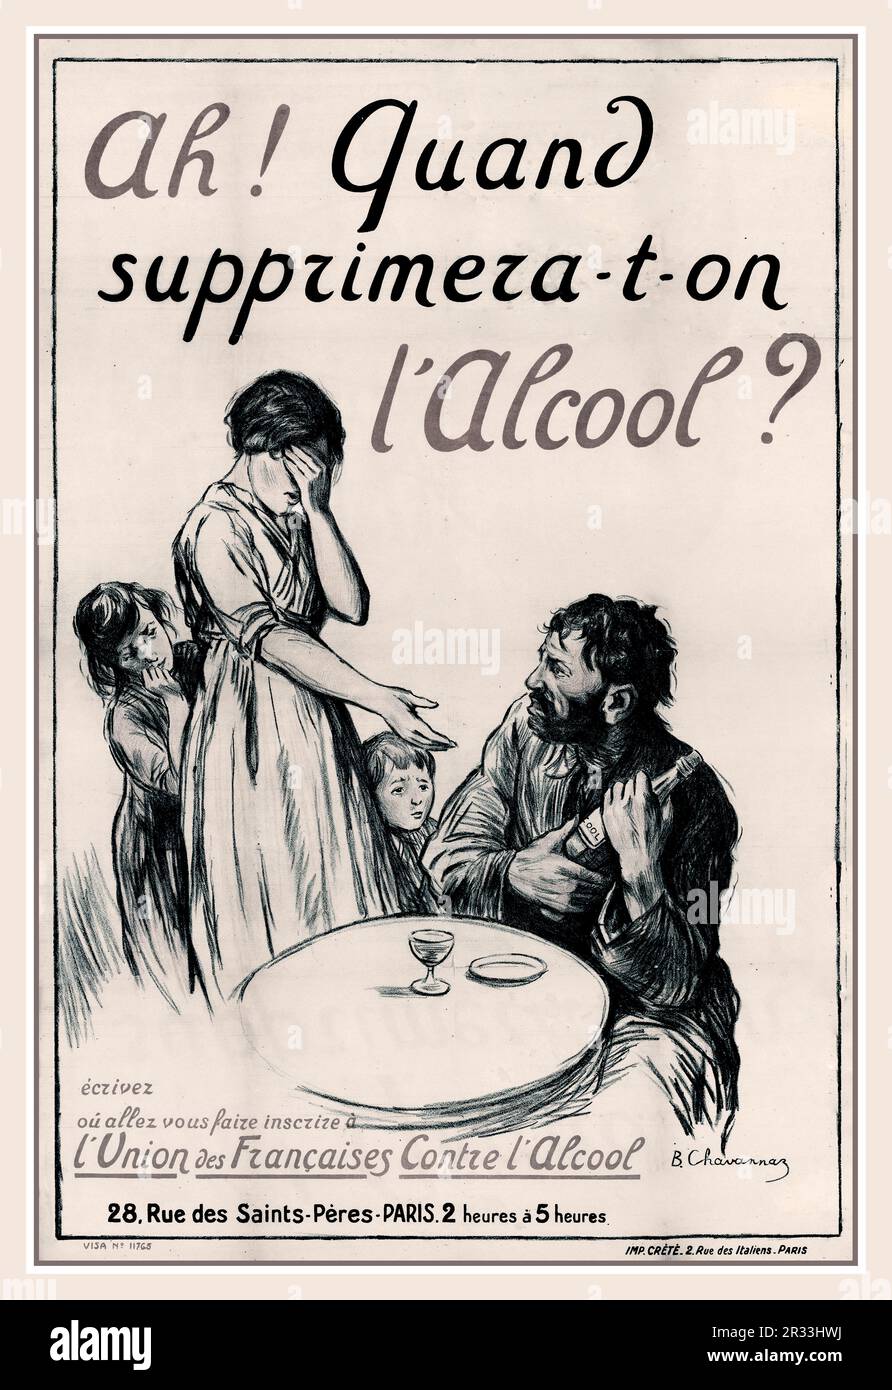 ALCOHOLISM FRANCE VINTAGE POSTER A wife asking her drunkard husband to hand over a bottle containing an alcoholic drink 1900s 1920 Union des Francaises contre l'Alcool. Paris France Stock Photo